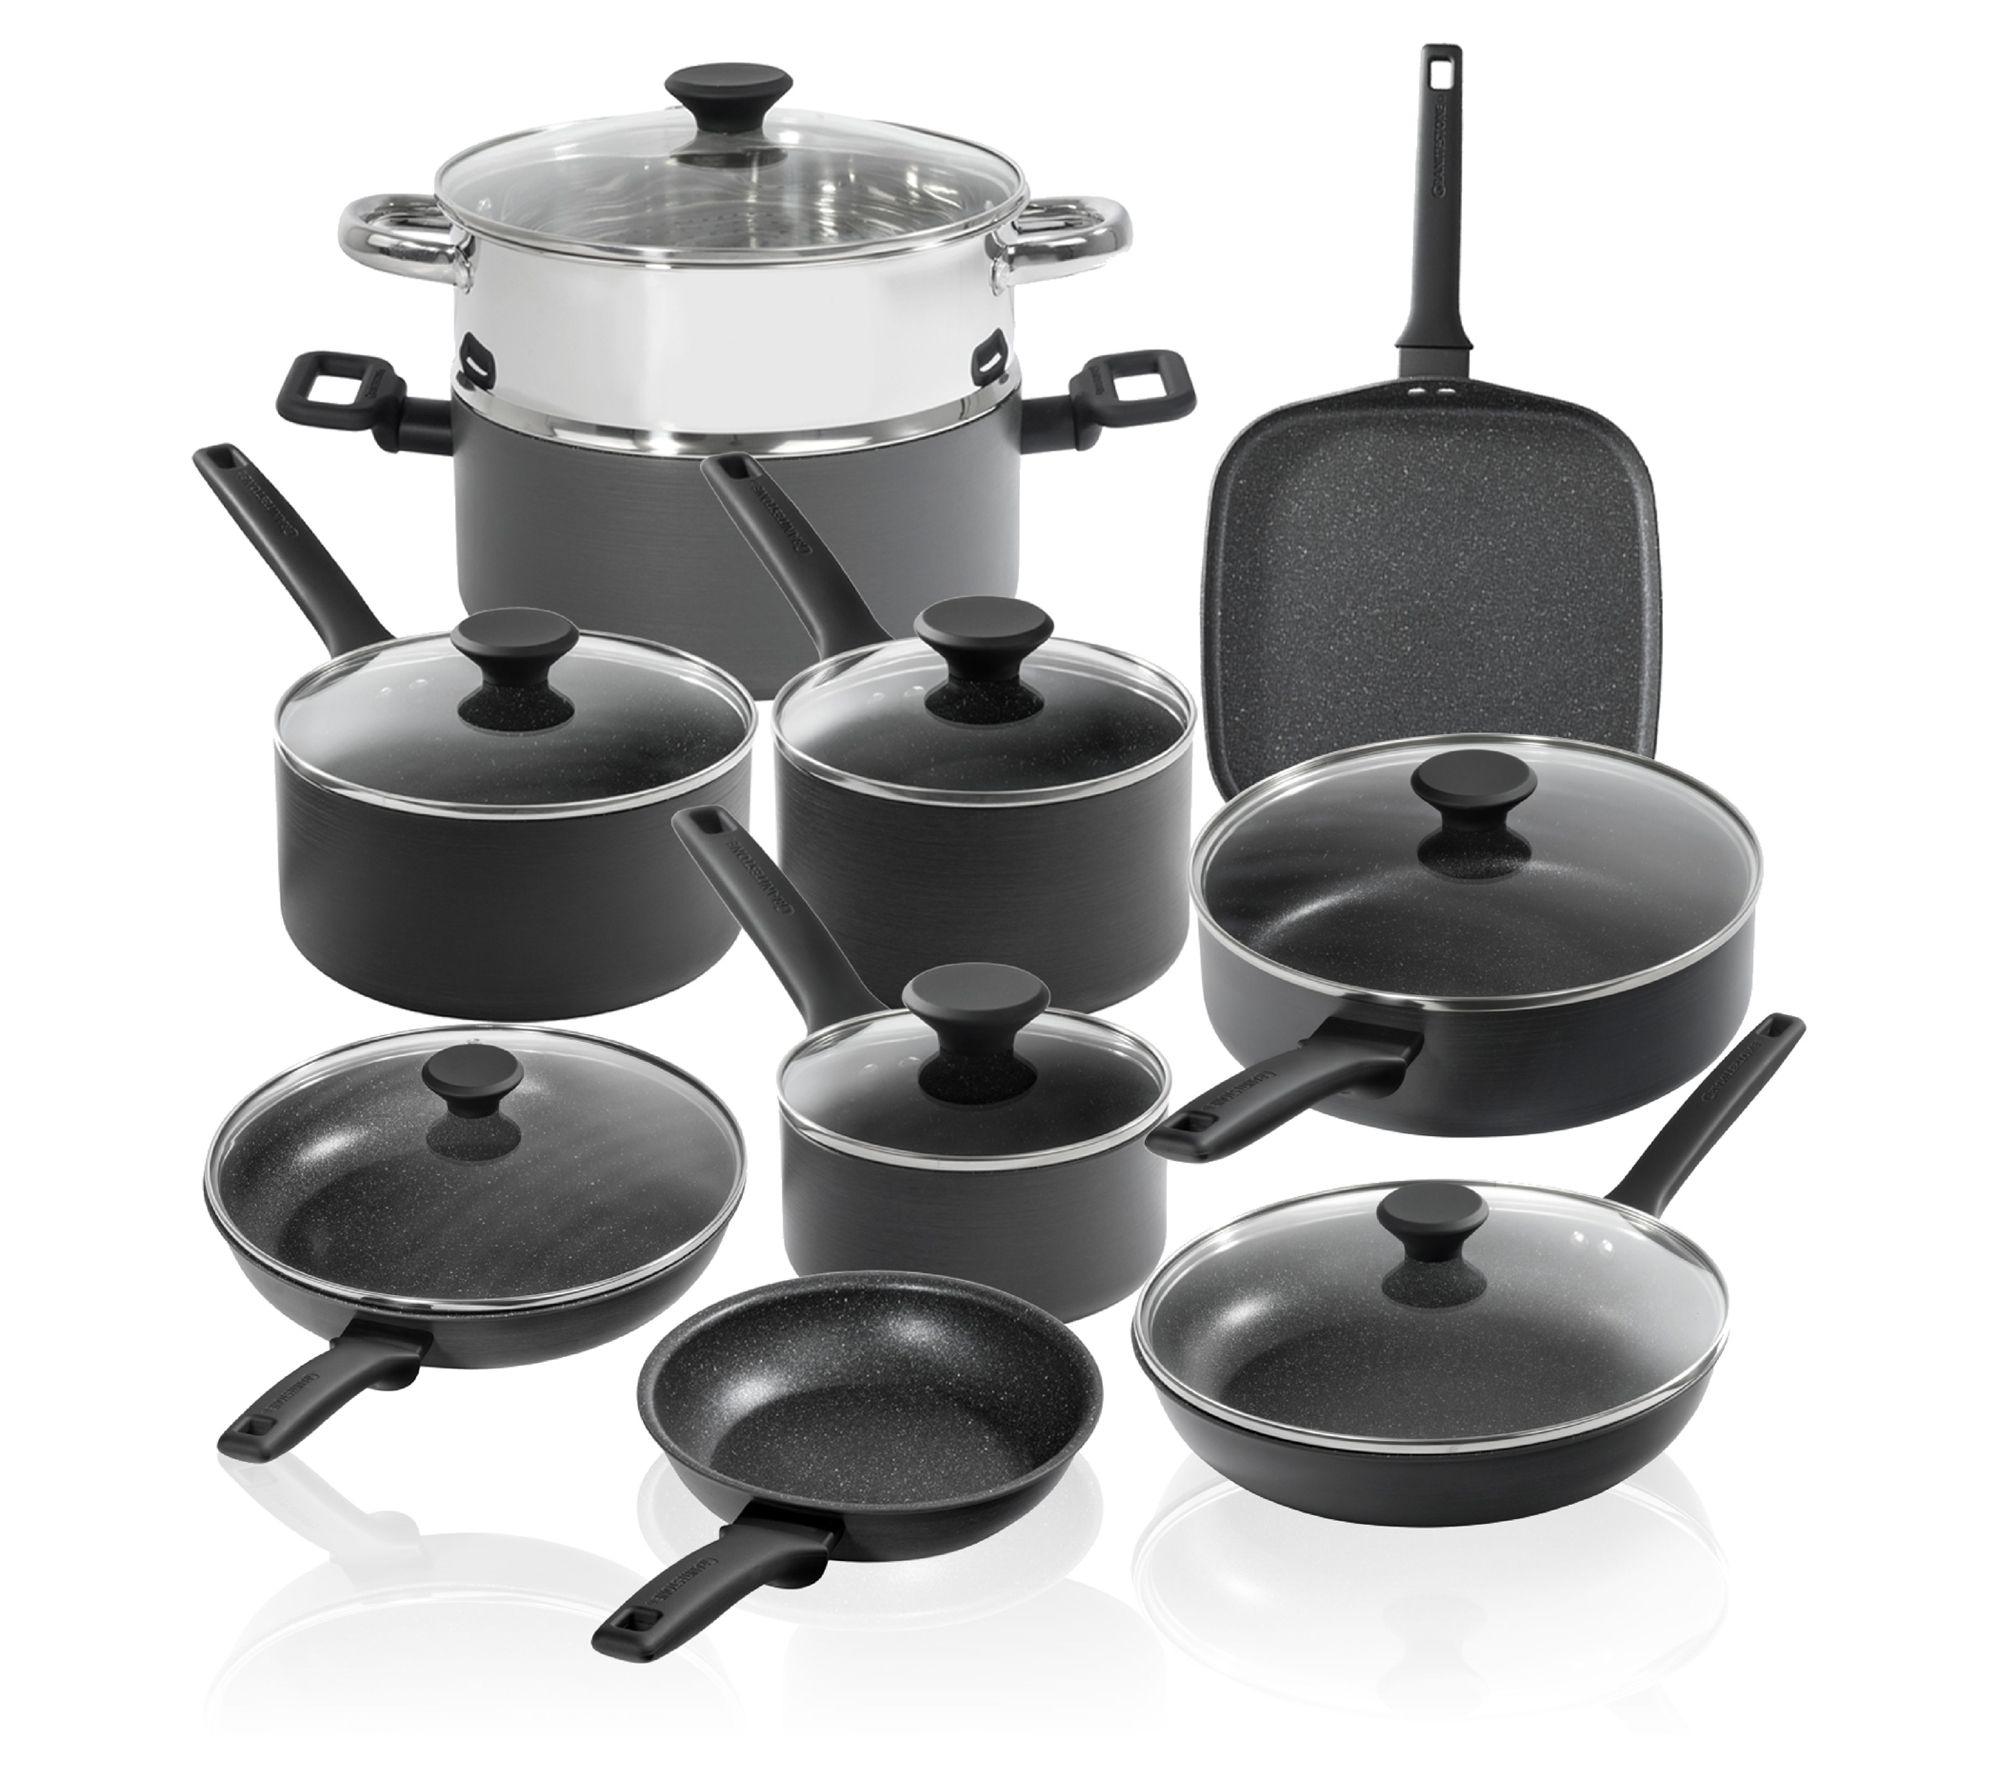 Granitestone Original 10 Piece Nonstick Cookware Set, Scratch-Resistant,  Granite-Coated, Dishwasher and Oven-Safe Kitchenware, PFOA-Free Pots and  Pans